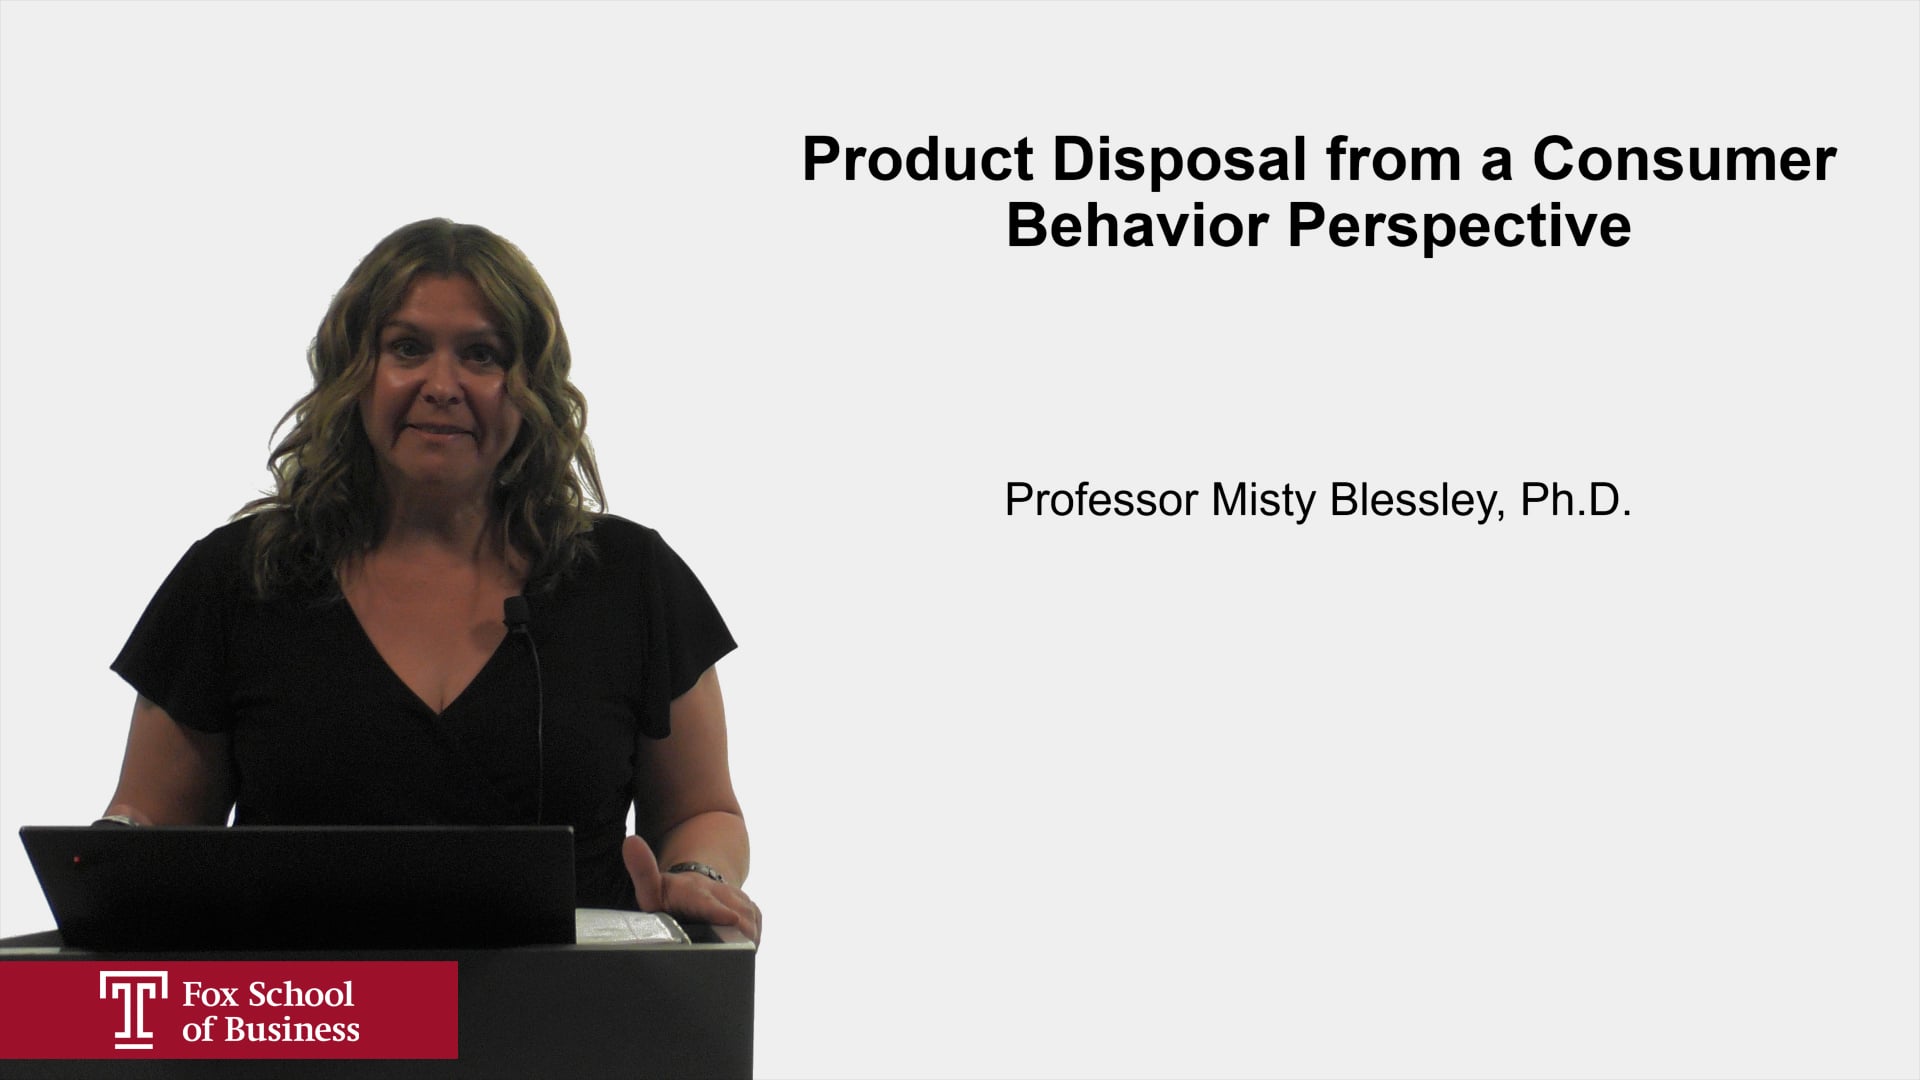 Product Disposal from a Consumer Behavior Perspective